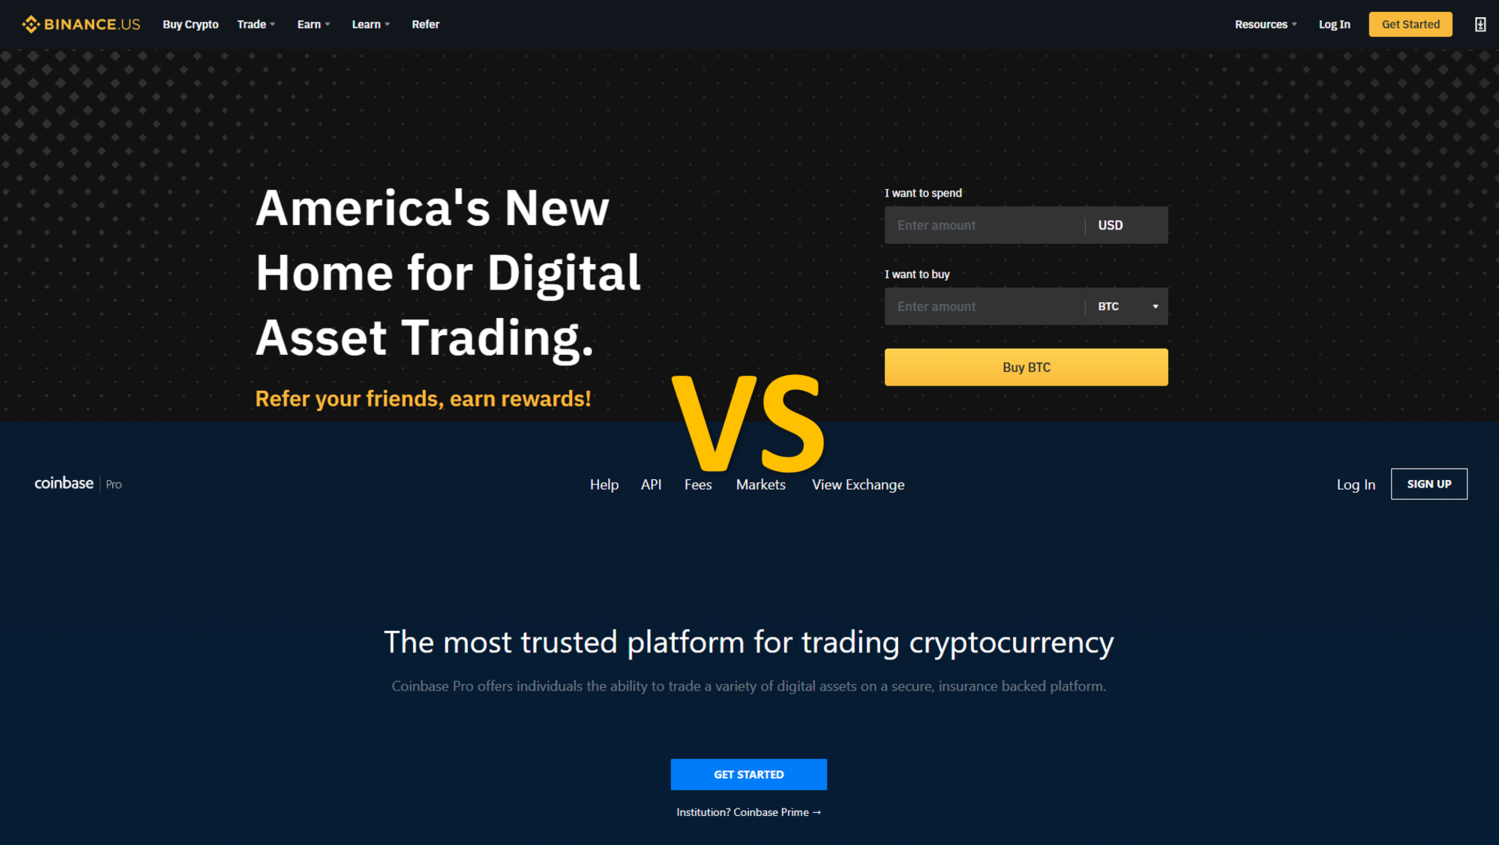 How to Transfer Funds from Binance to Coinbase? - CoinCodeCap